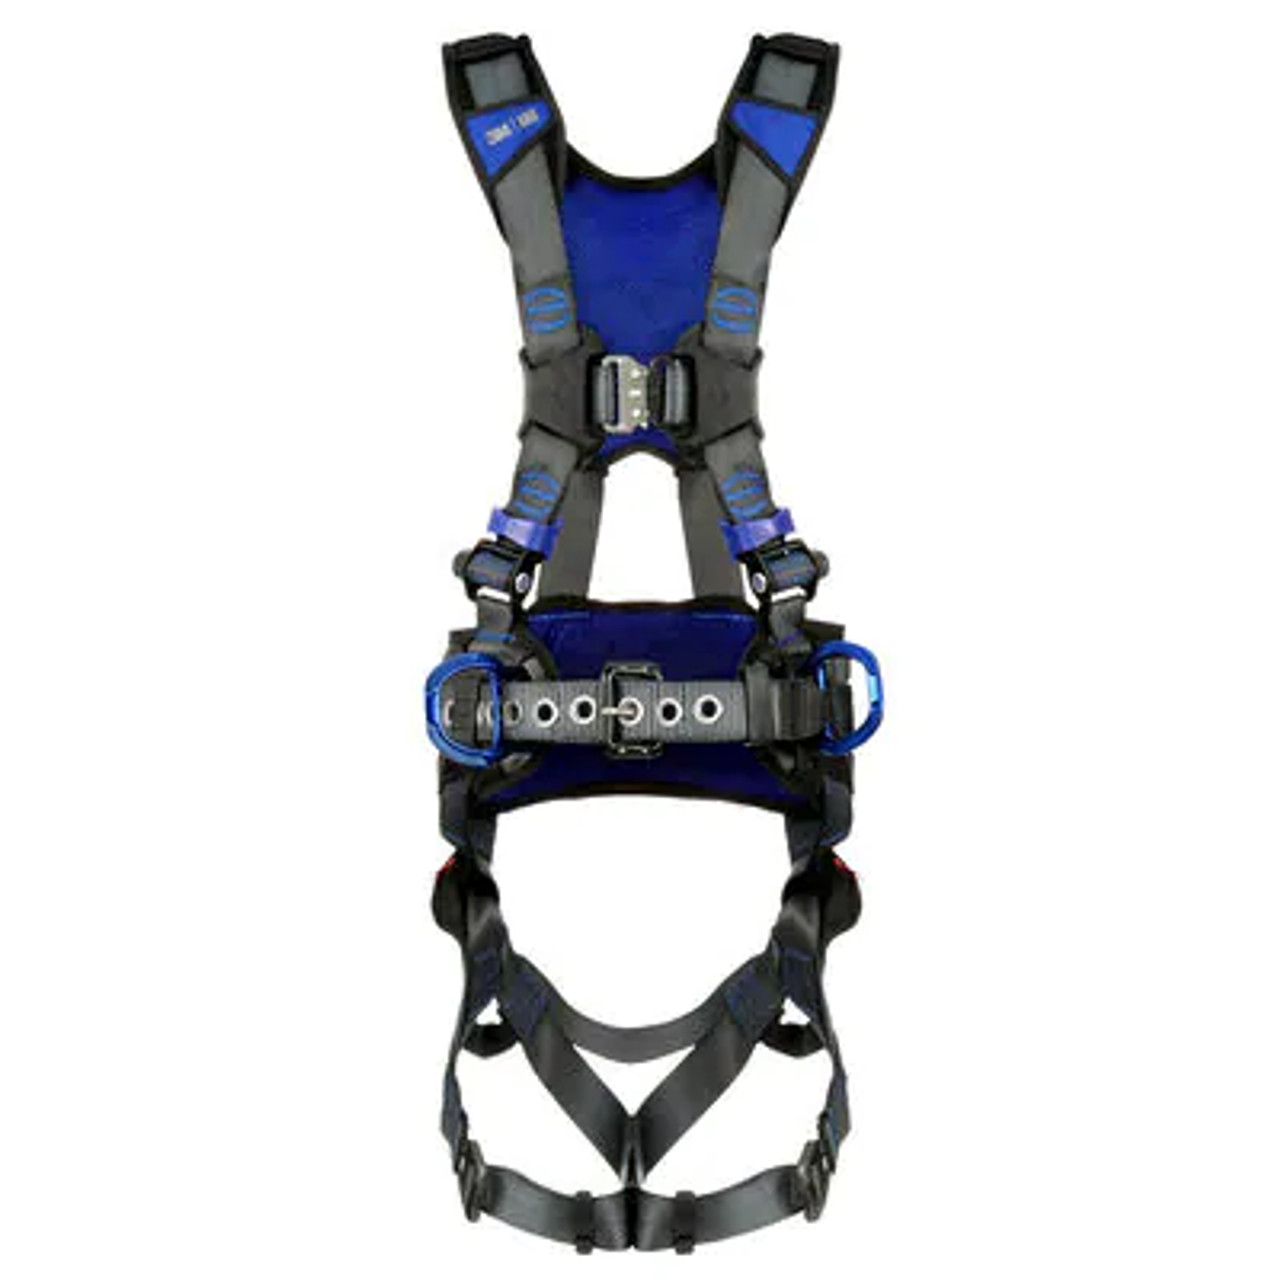 Which Fall Protection Harness is the Most Comfortable? - PK Safety